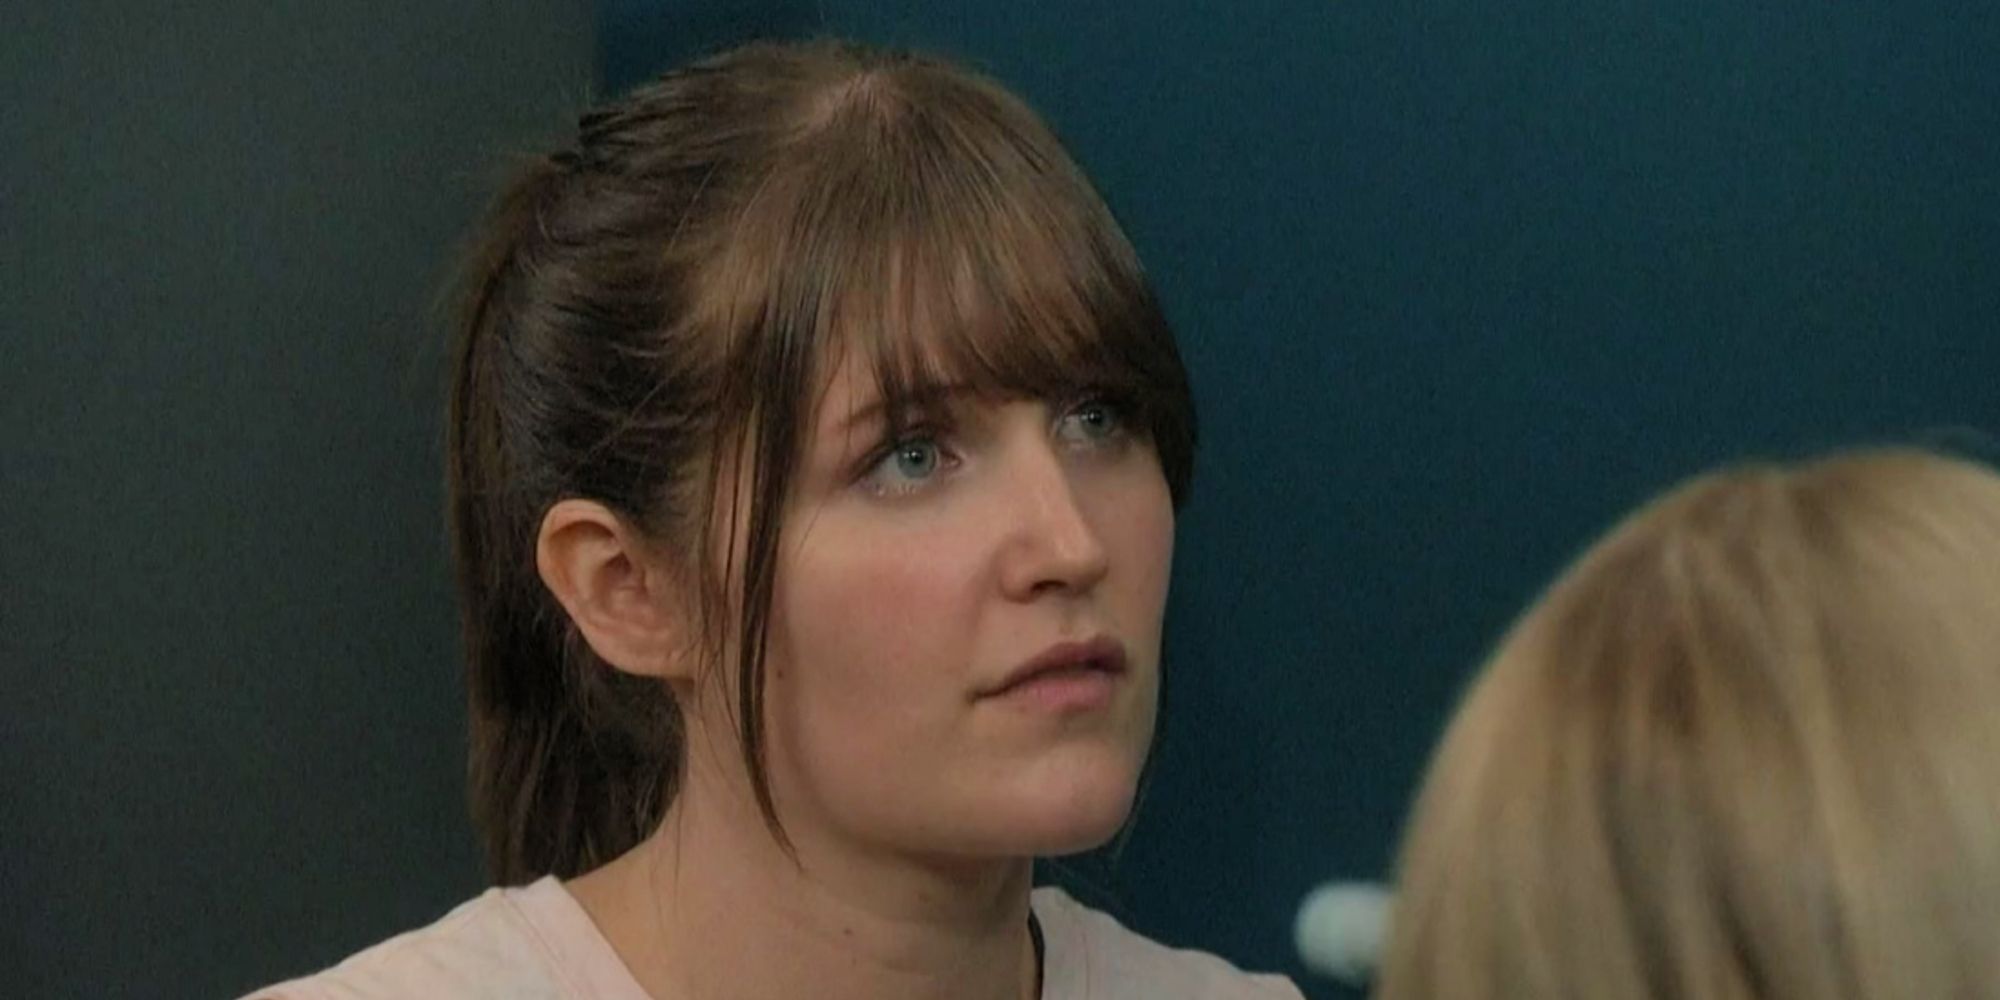 A close up of Sarah Beth on Big Brother 23.